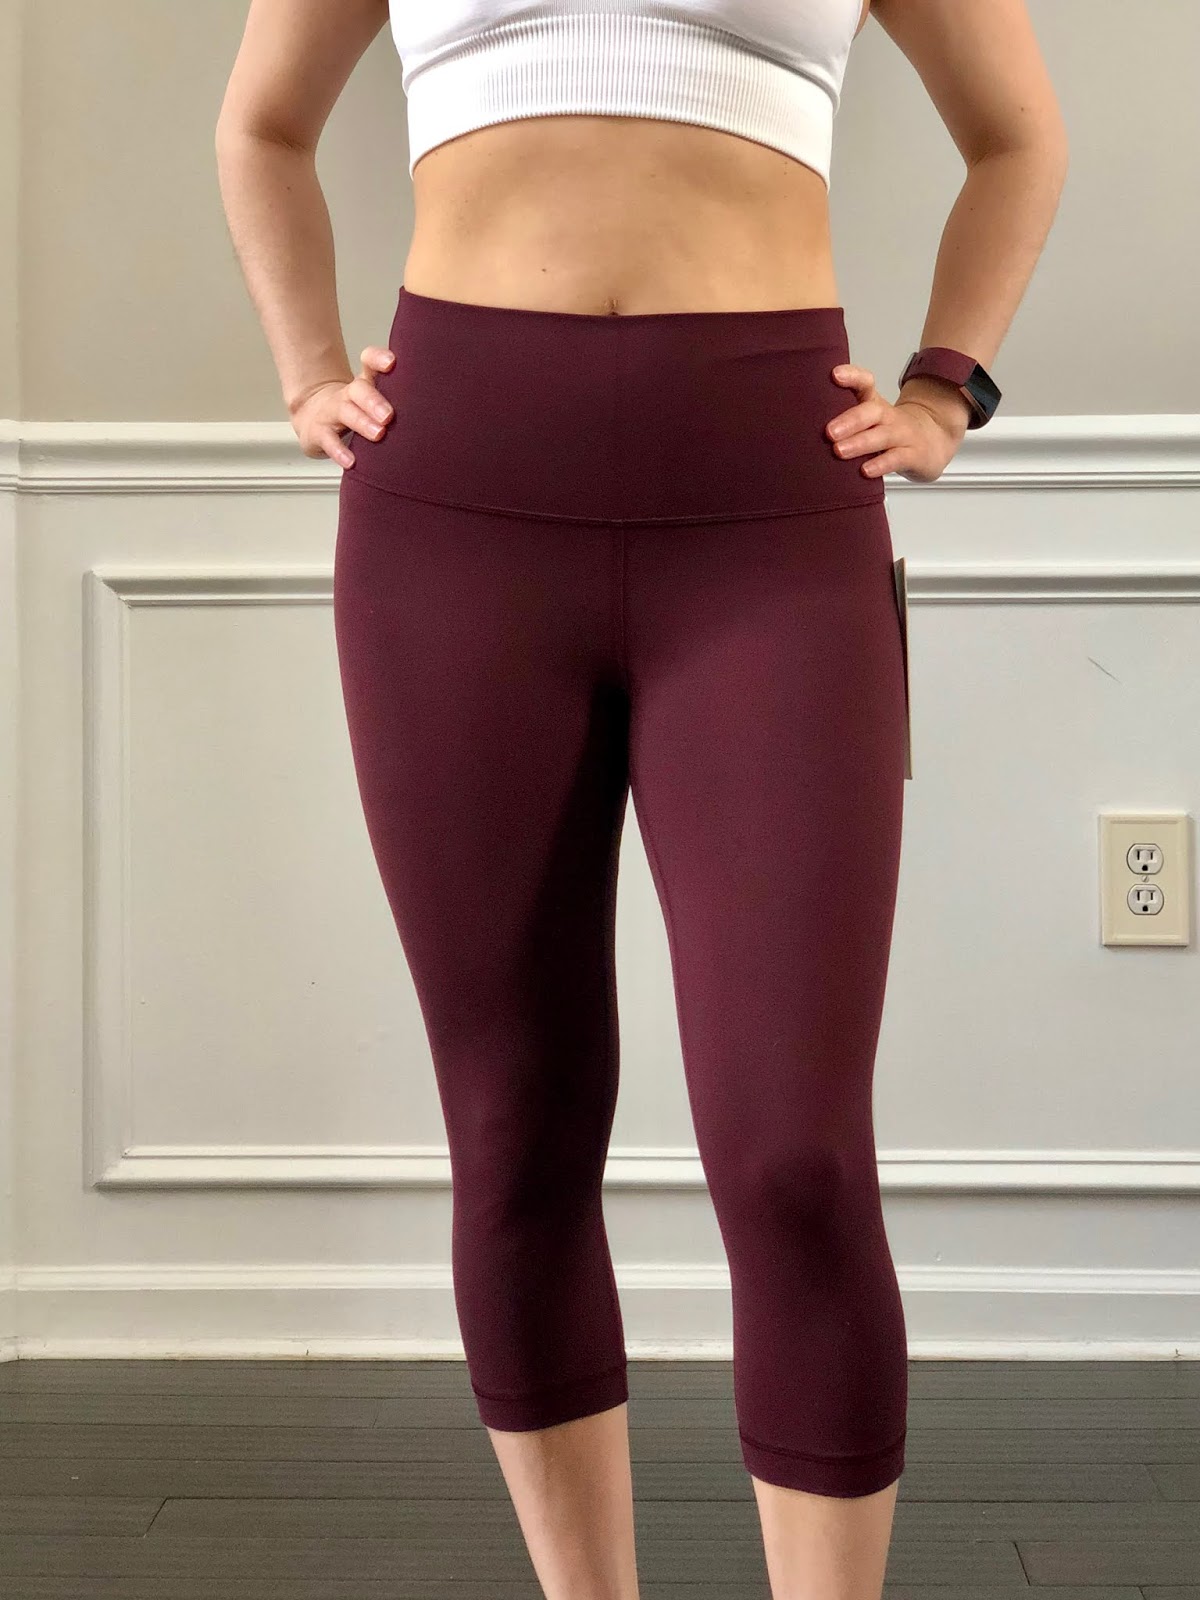 FIT REVIEW! ALIGN CROP HIGH RISE 17 VS. ALIGN CROP 21 AND HOTTY HOT SHORT  2.5 INCOGNITO CAMO PINK